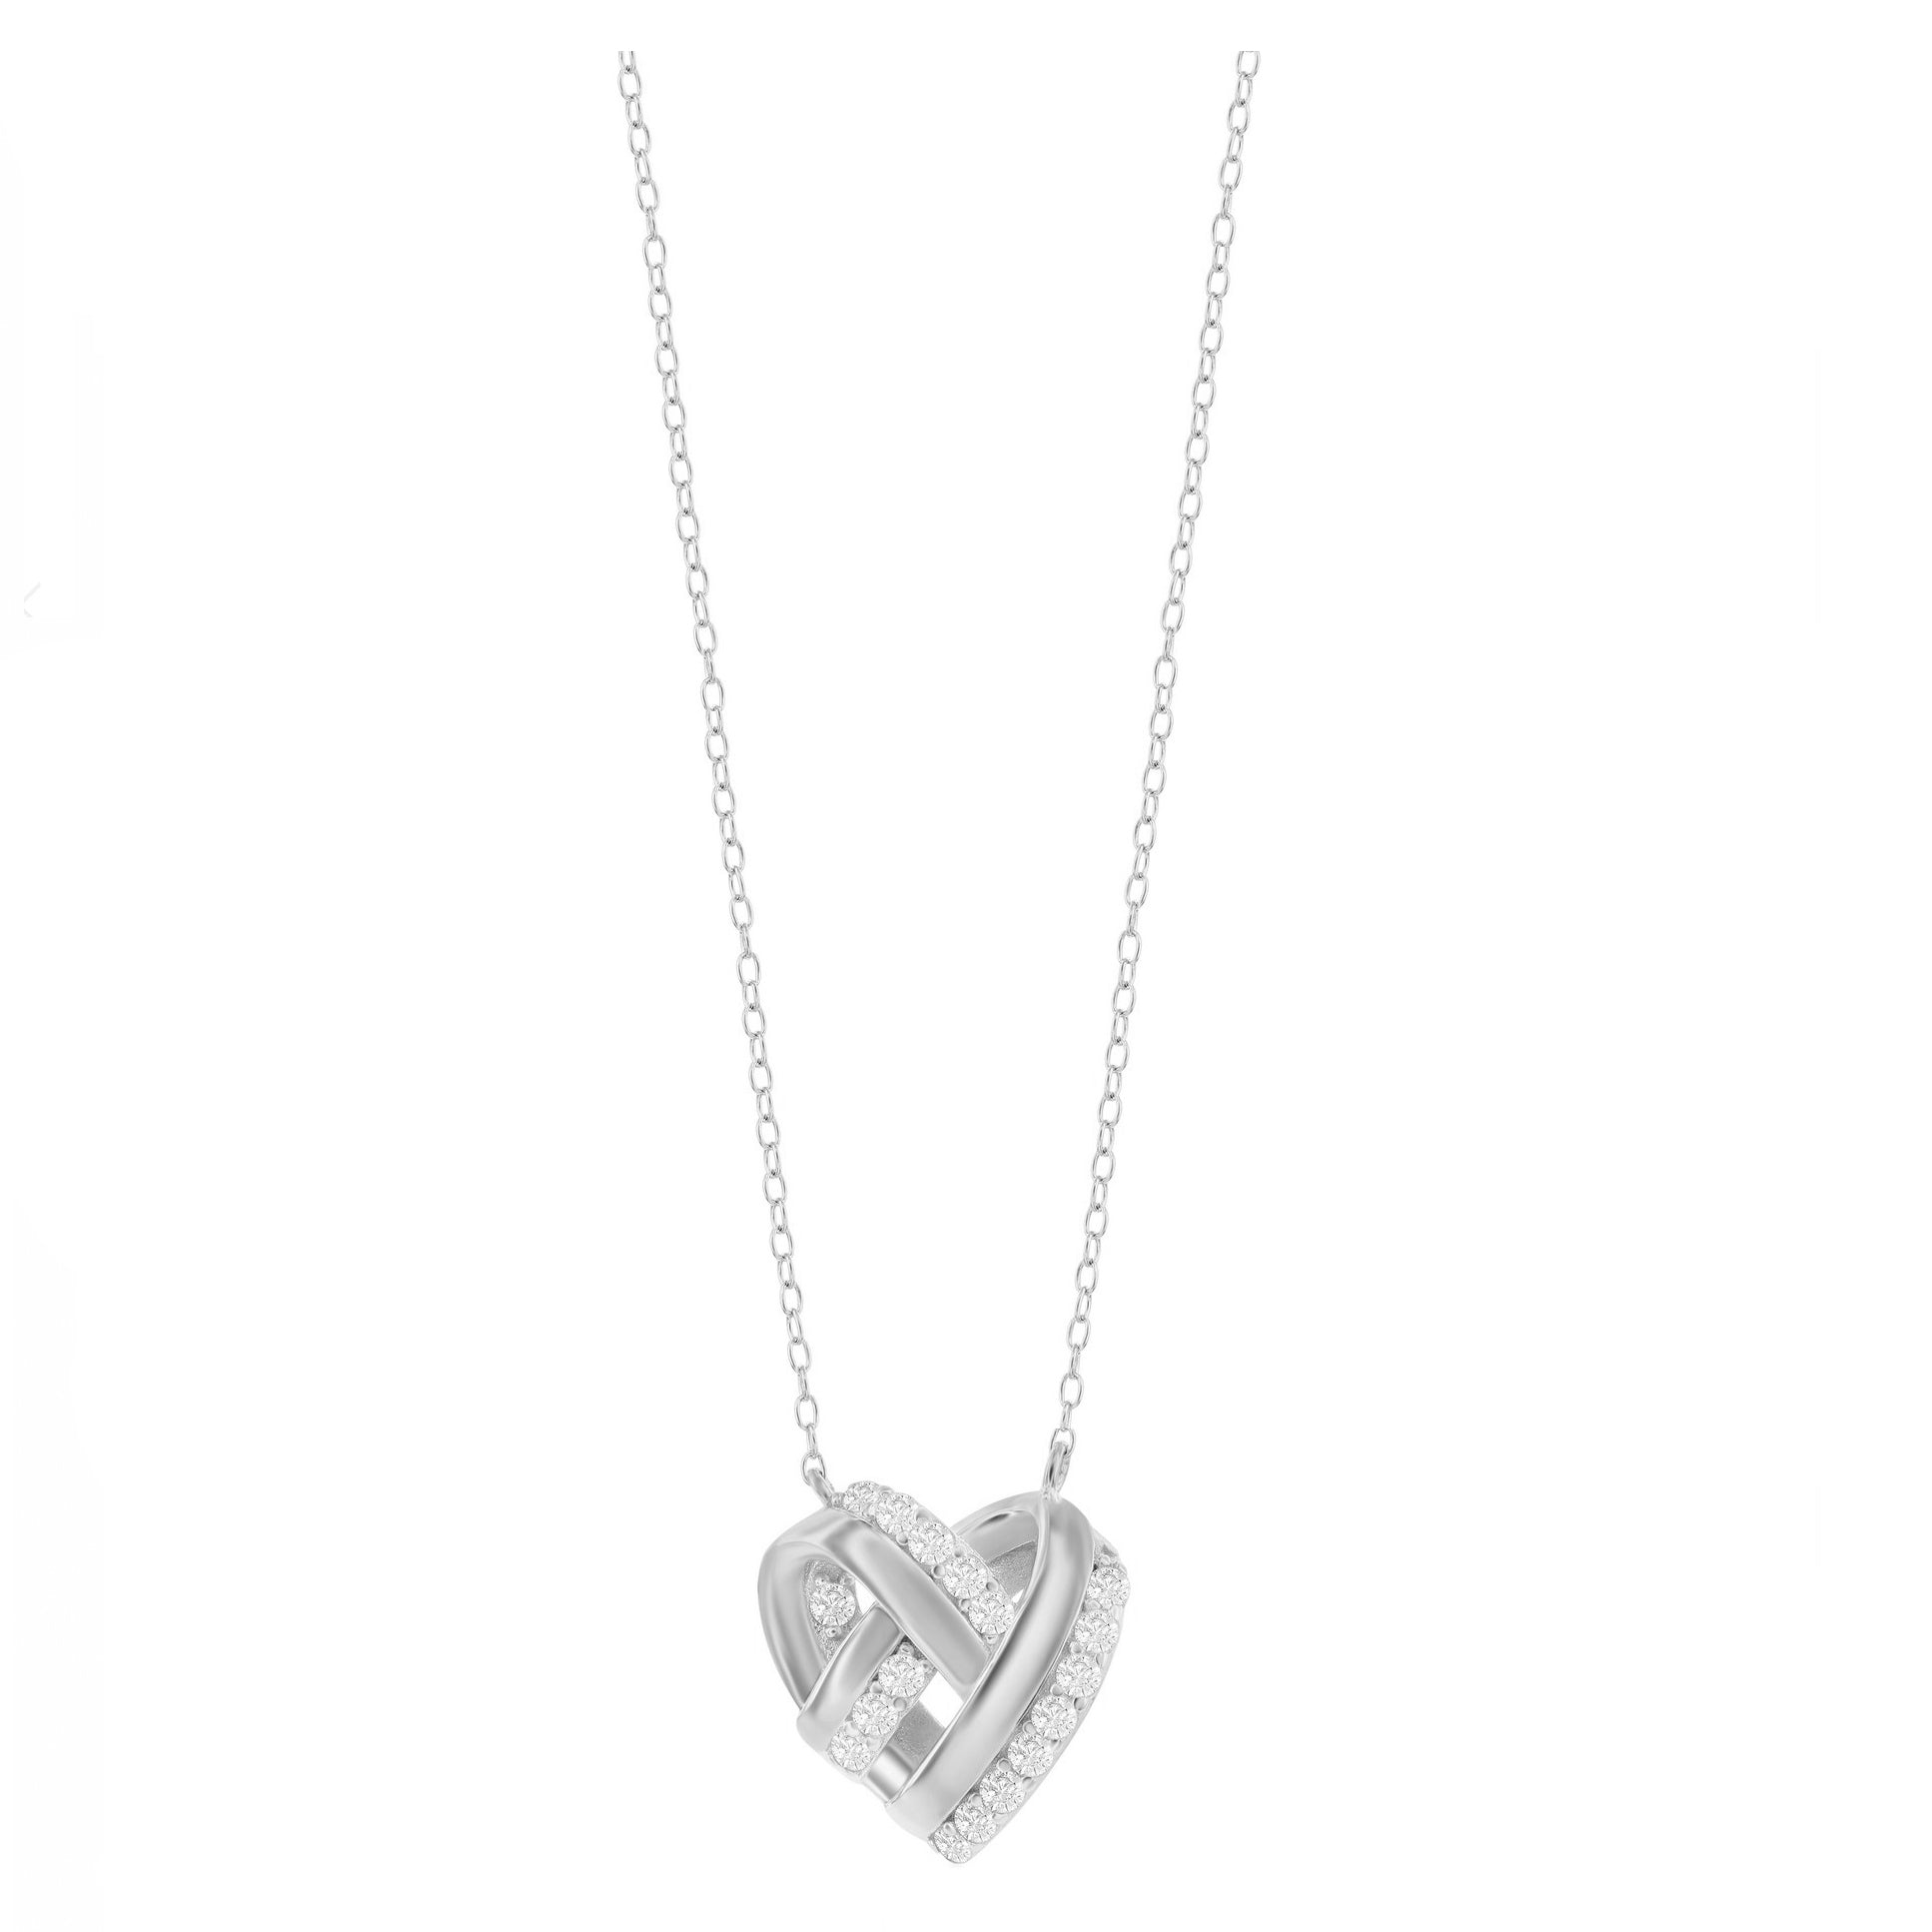 Sparkle Knotted Heart Necklace